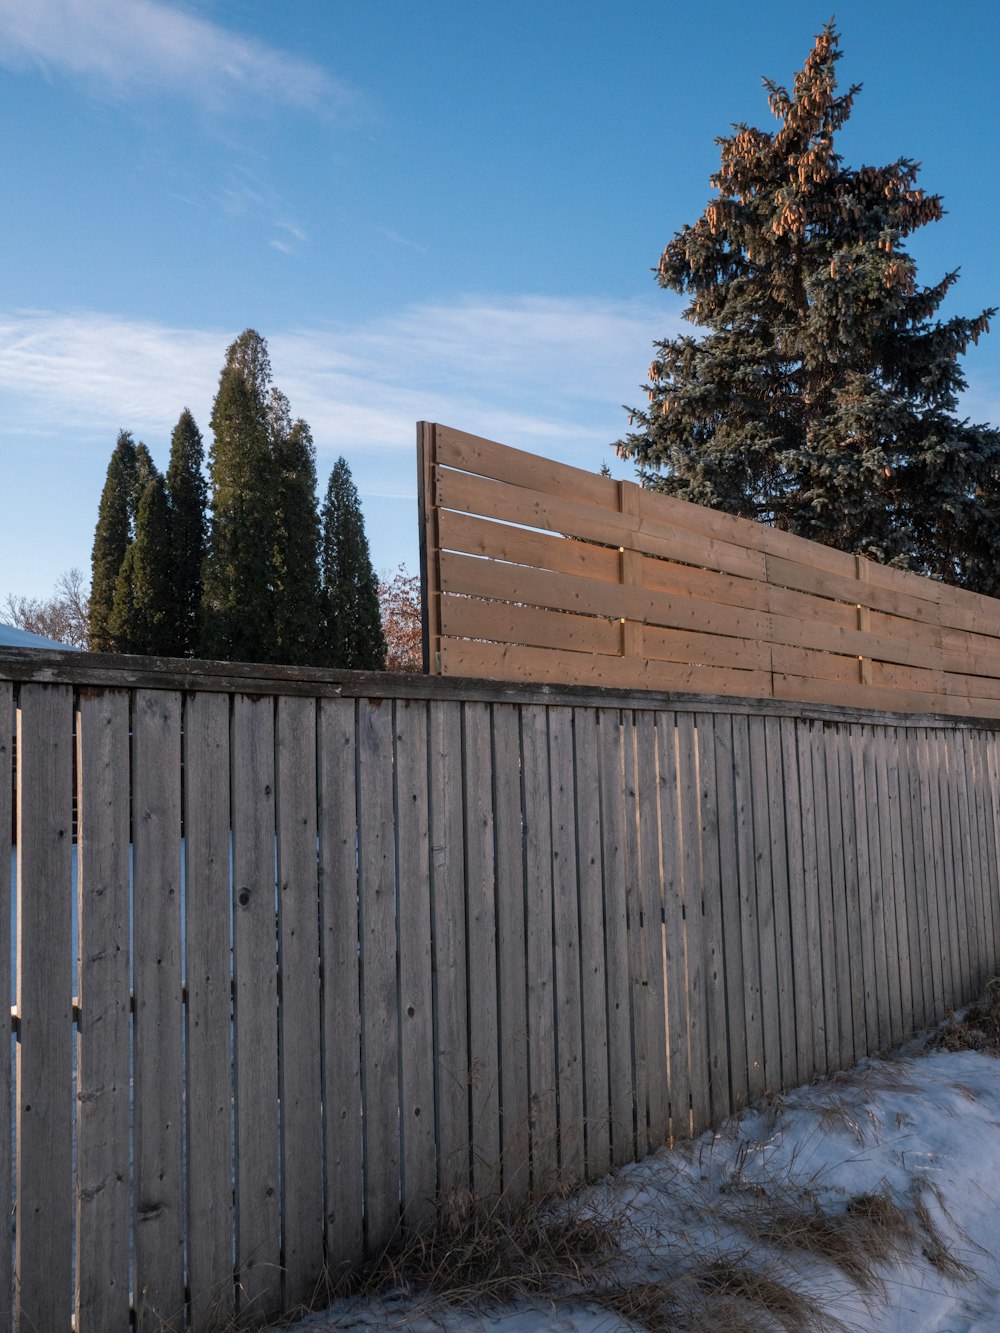 brown wooden fence near green trees under blue sky during daytime